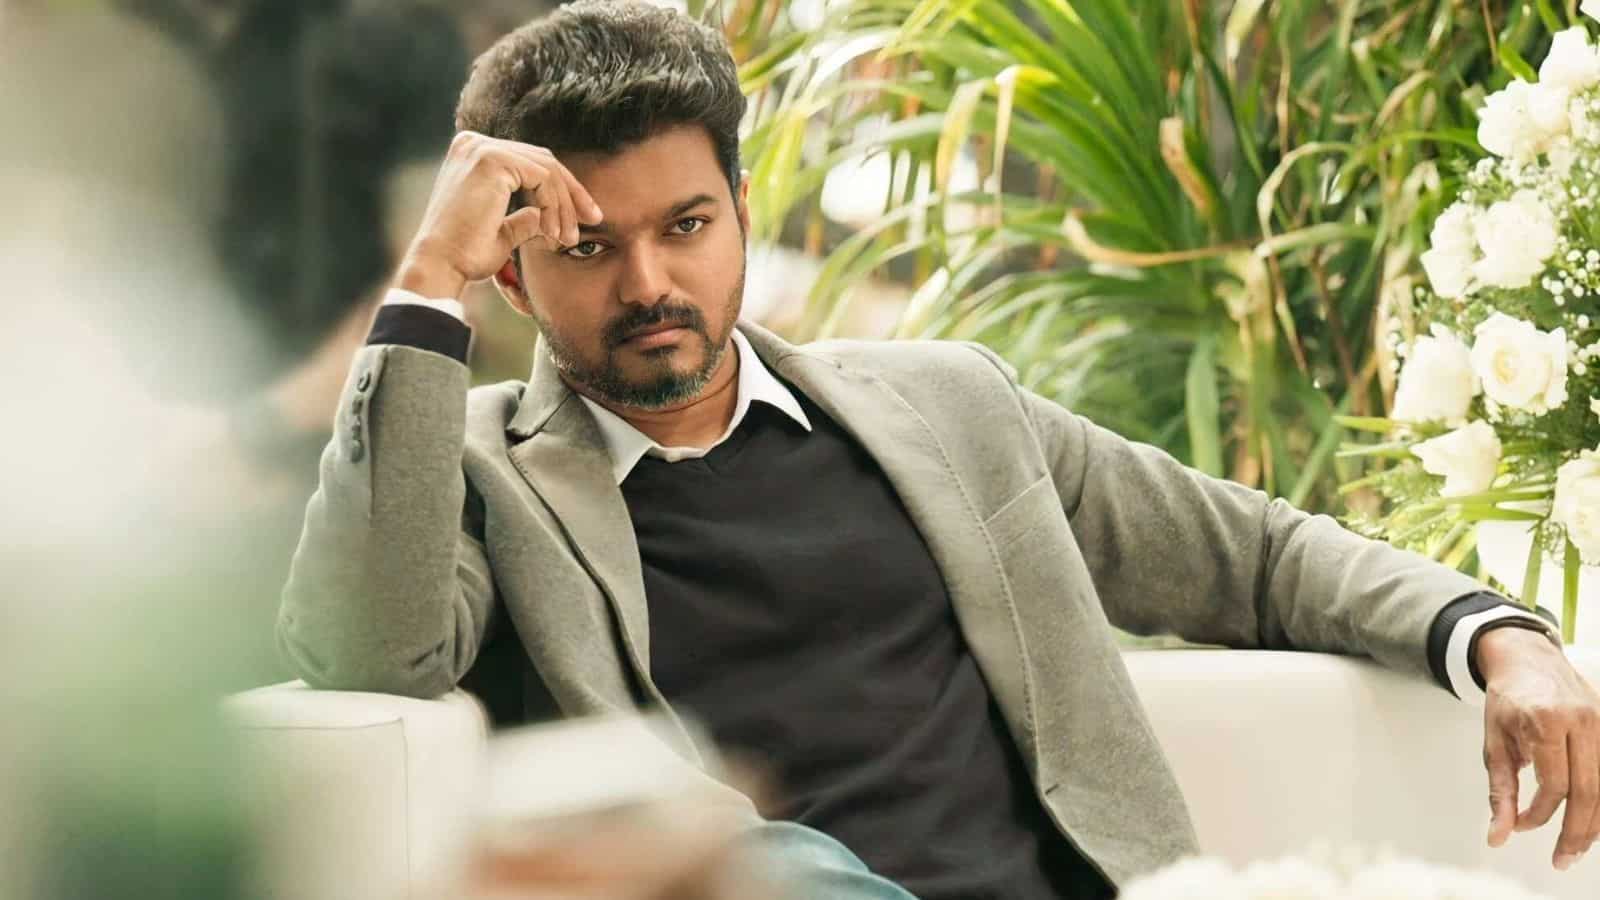 Pay tax promptly and punctually: HC imposes ₹1 lakh fine on actor Vijay for seeking tax exemption on Rolls Royce